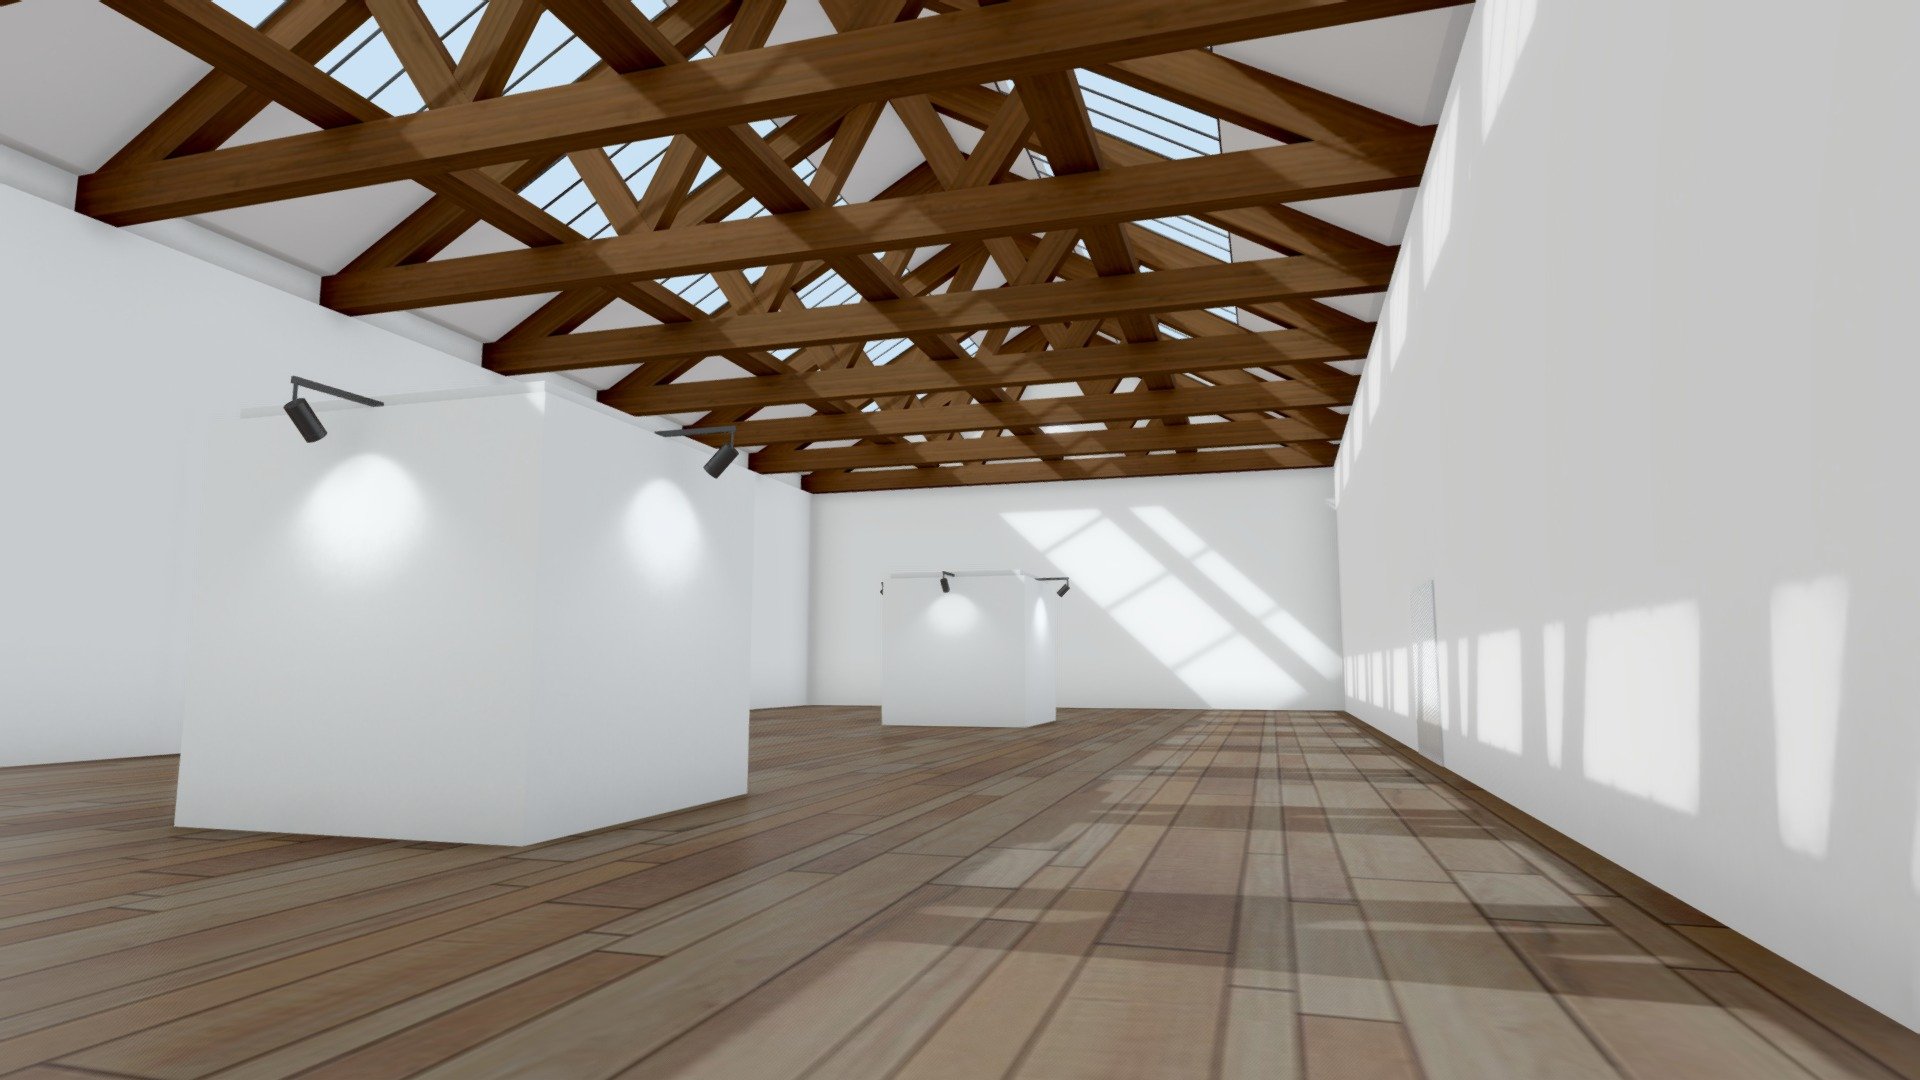 VR Gallery interior made for Product Showcase, scene has got baked in lighting.
UVs Ready.
Ambient Occlusion and Lighting with Blender.
FBX file size : 582KB

Click on the link to see more models : https://sketchfab.com/GbehnamG/store

If you need customized 3d models , feel free to contact at: mr.gbehnamg@yahoo.com - VR Wooden Gallery for Product Showcase 2021 - Buy Royalty Free 3D model by BehNaM (@GbehnamG) 3d model